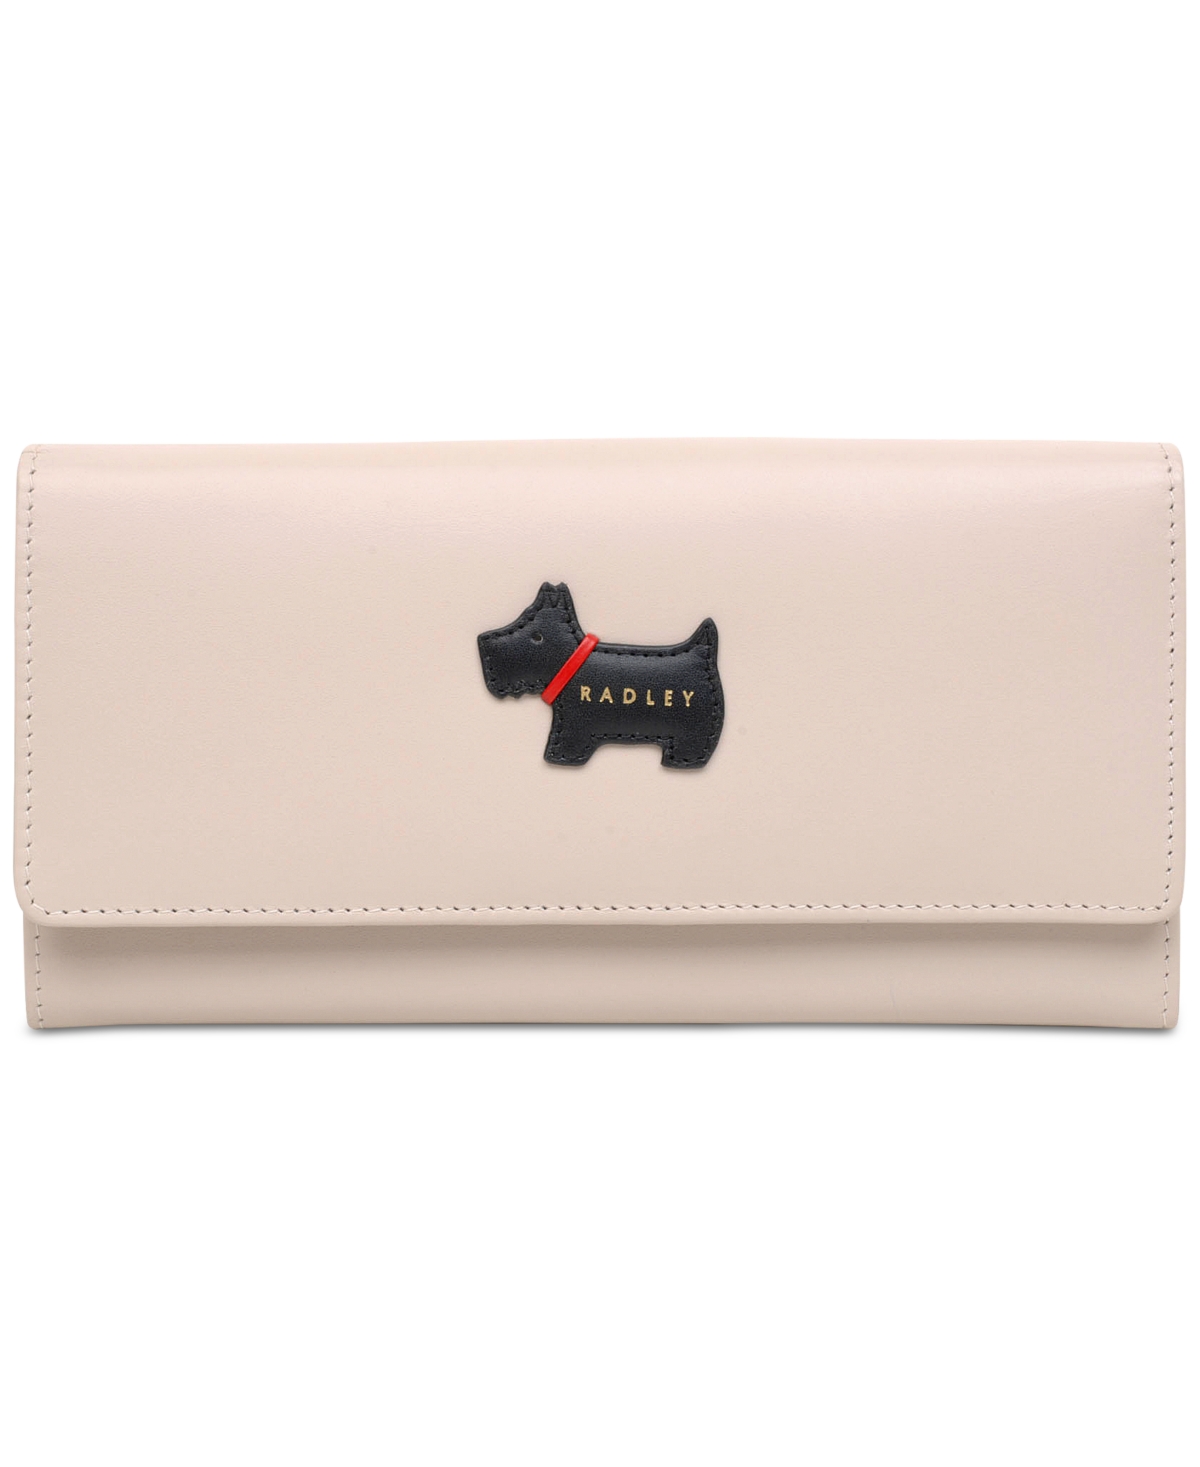 Shop Radley London Women's Heritage Radley Large Leather Flapover Wallet In Dove Grey,gold